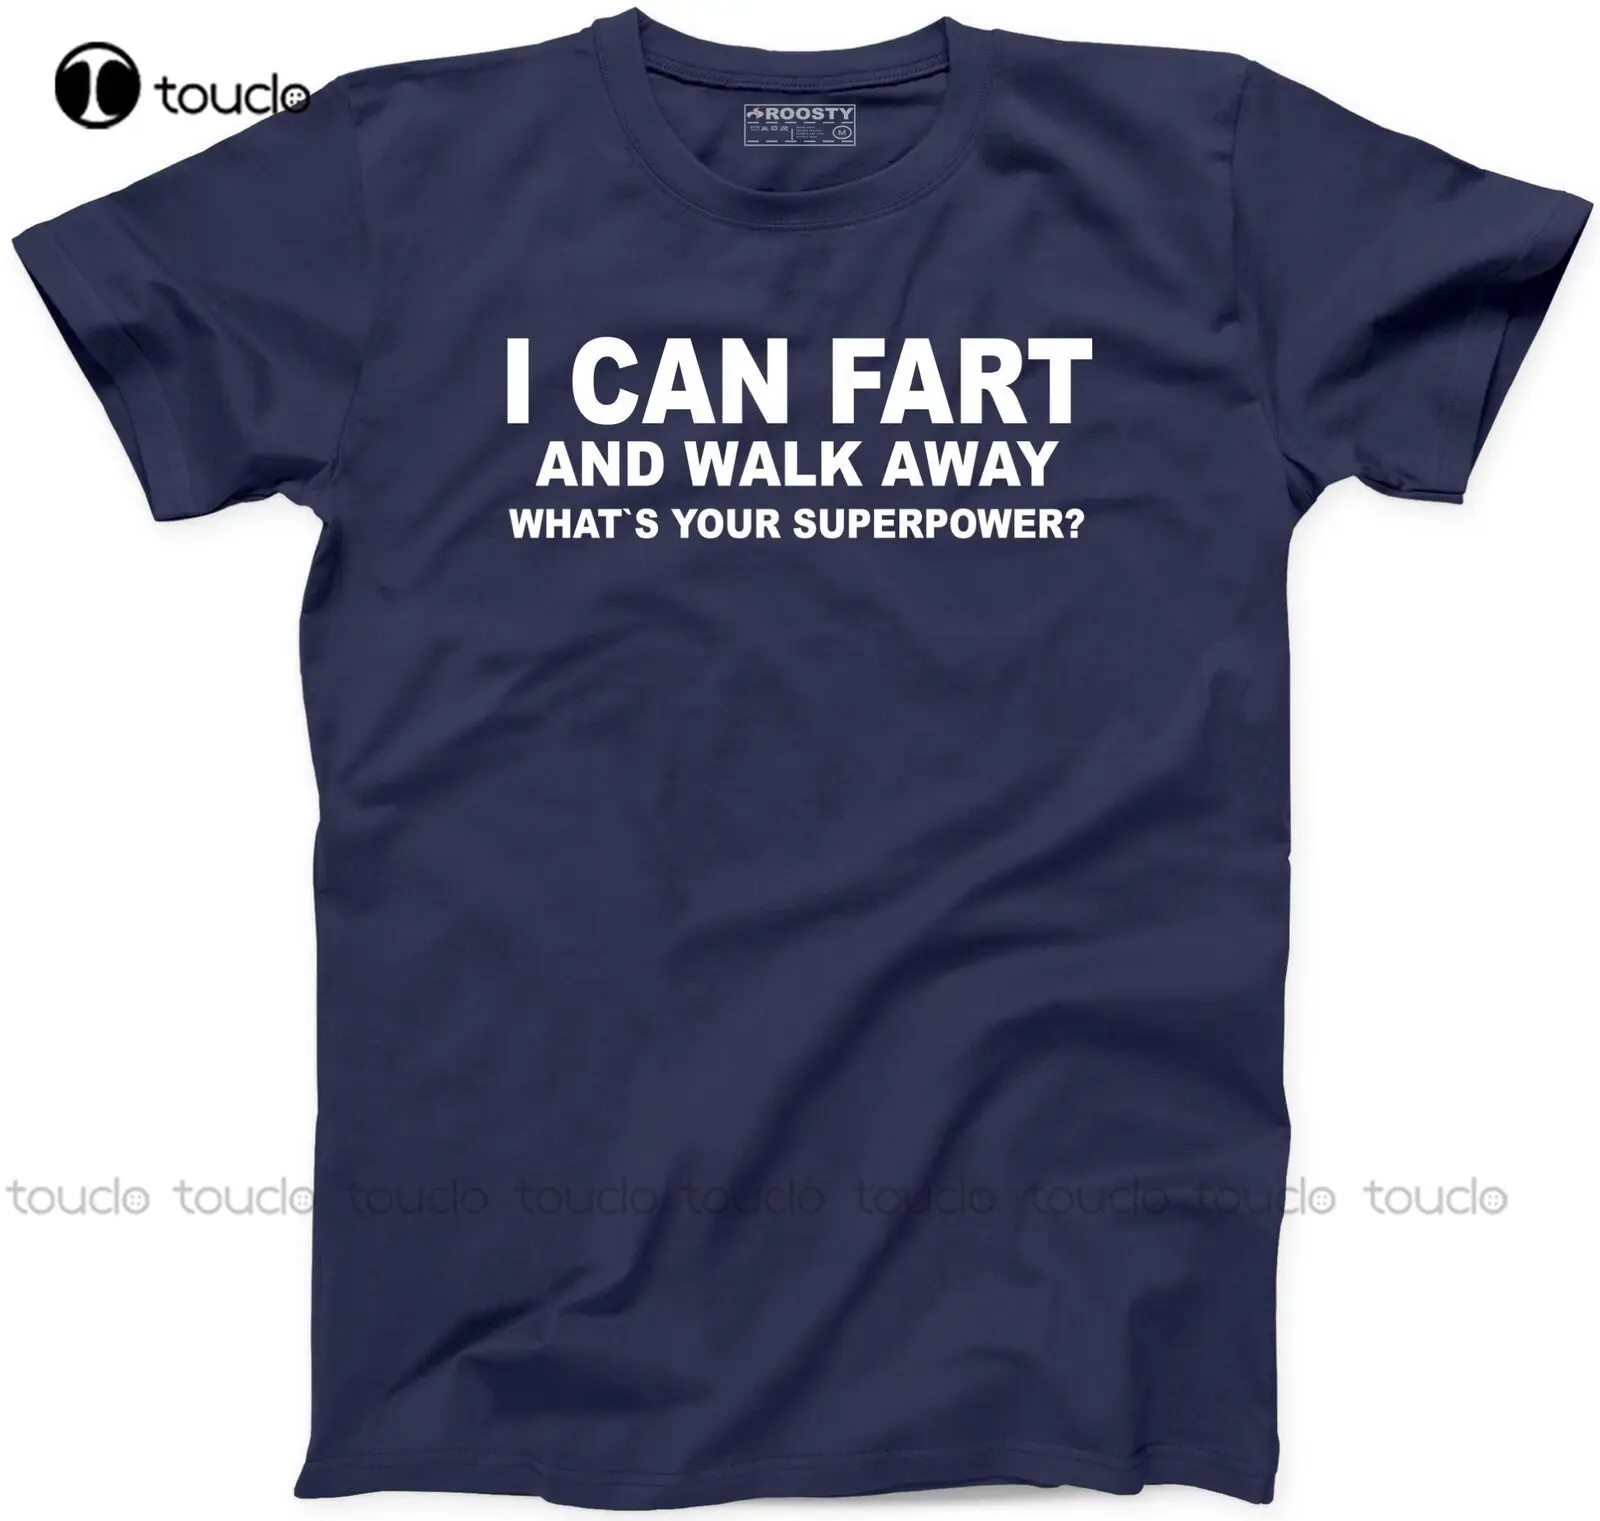 

I Can Fart And Walk Away Whats Your Superpower T Shirt Funny Joke Dad Gift Tee Golf Shirt Fashion Tshirt Summer New Popular